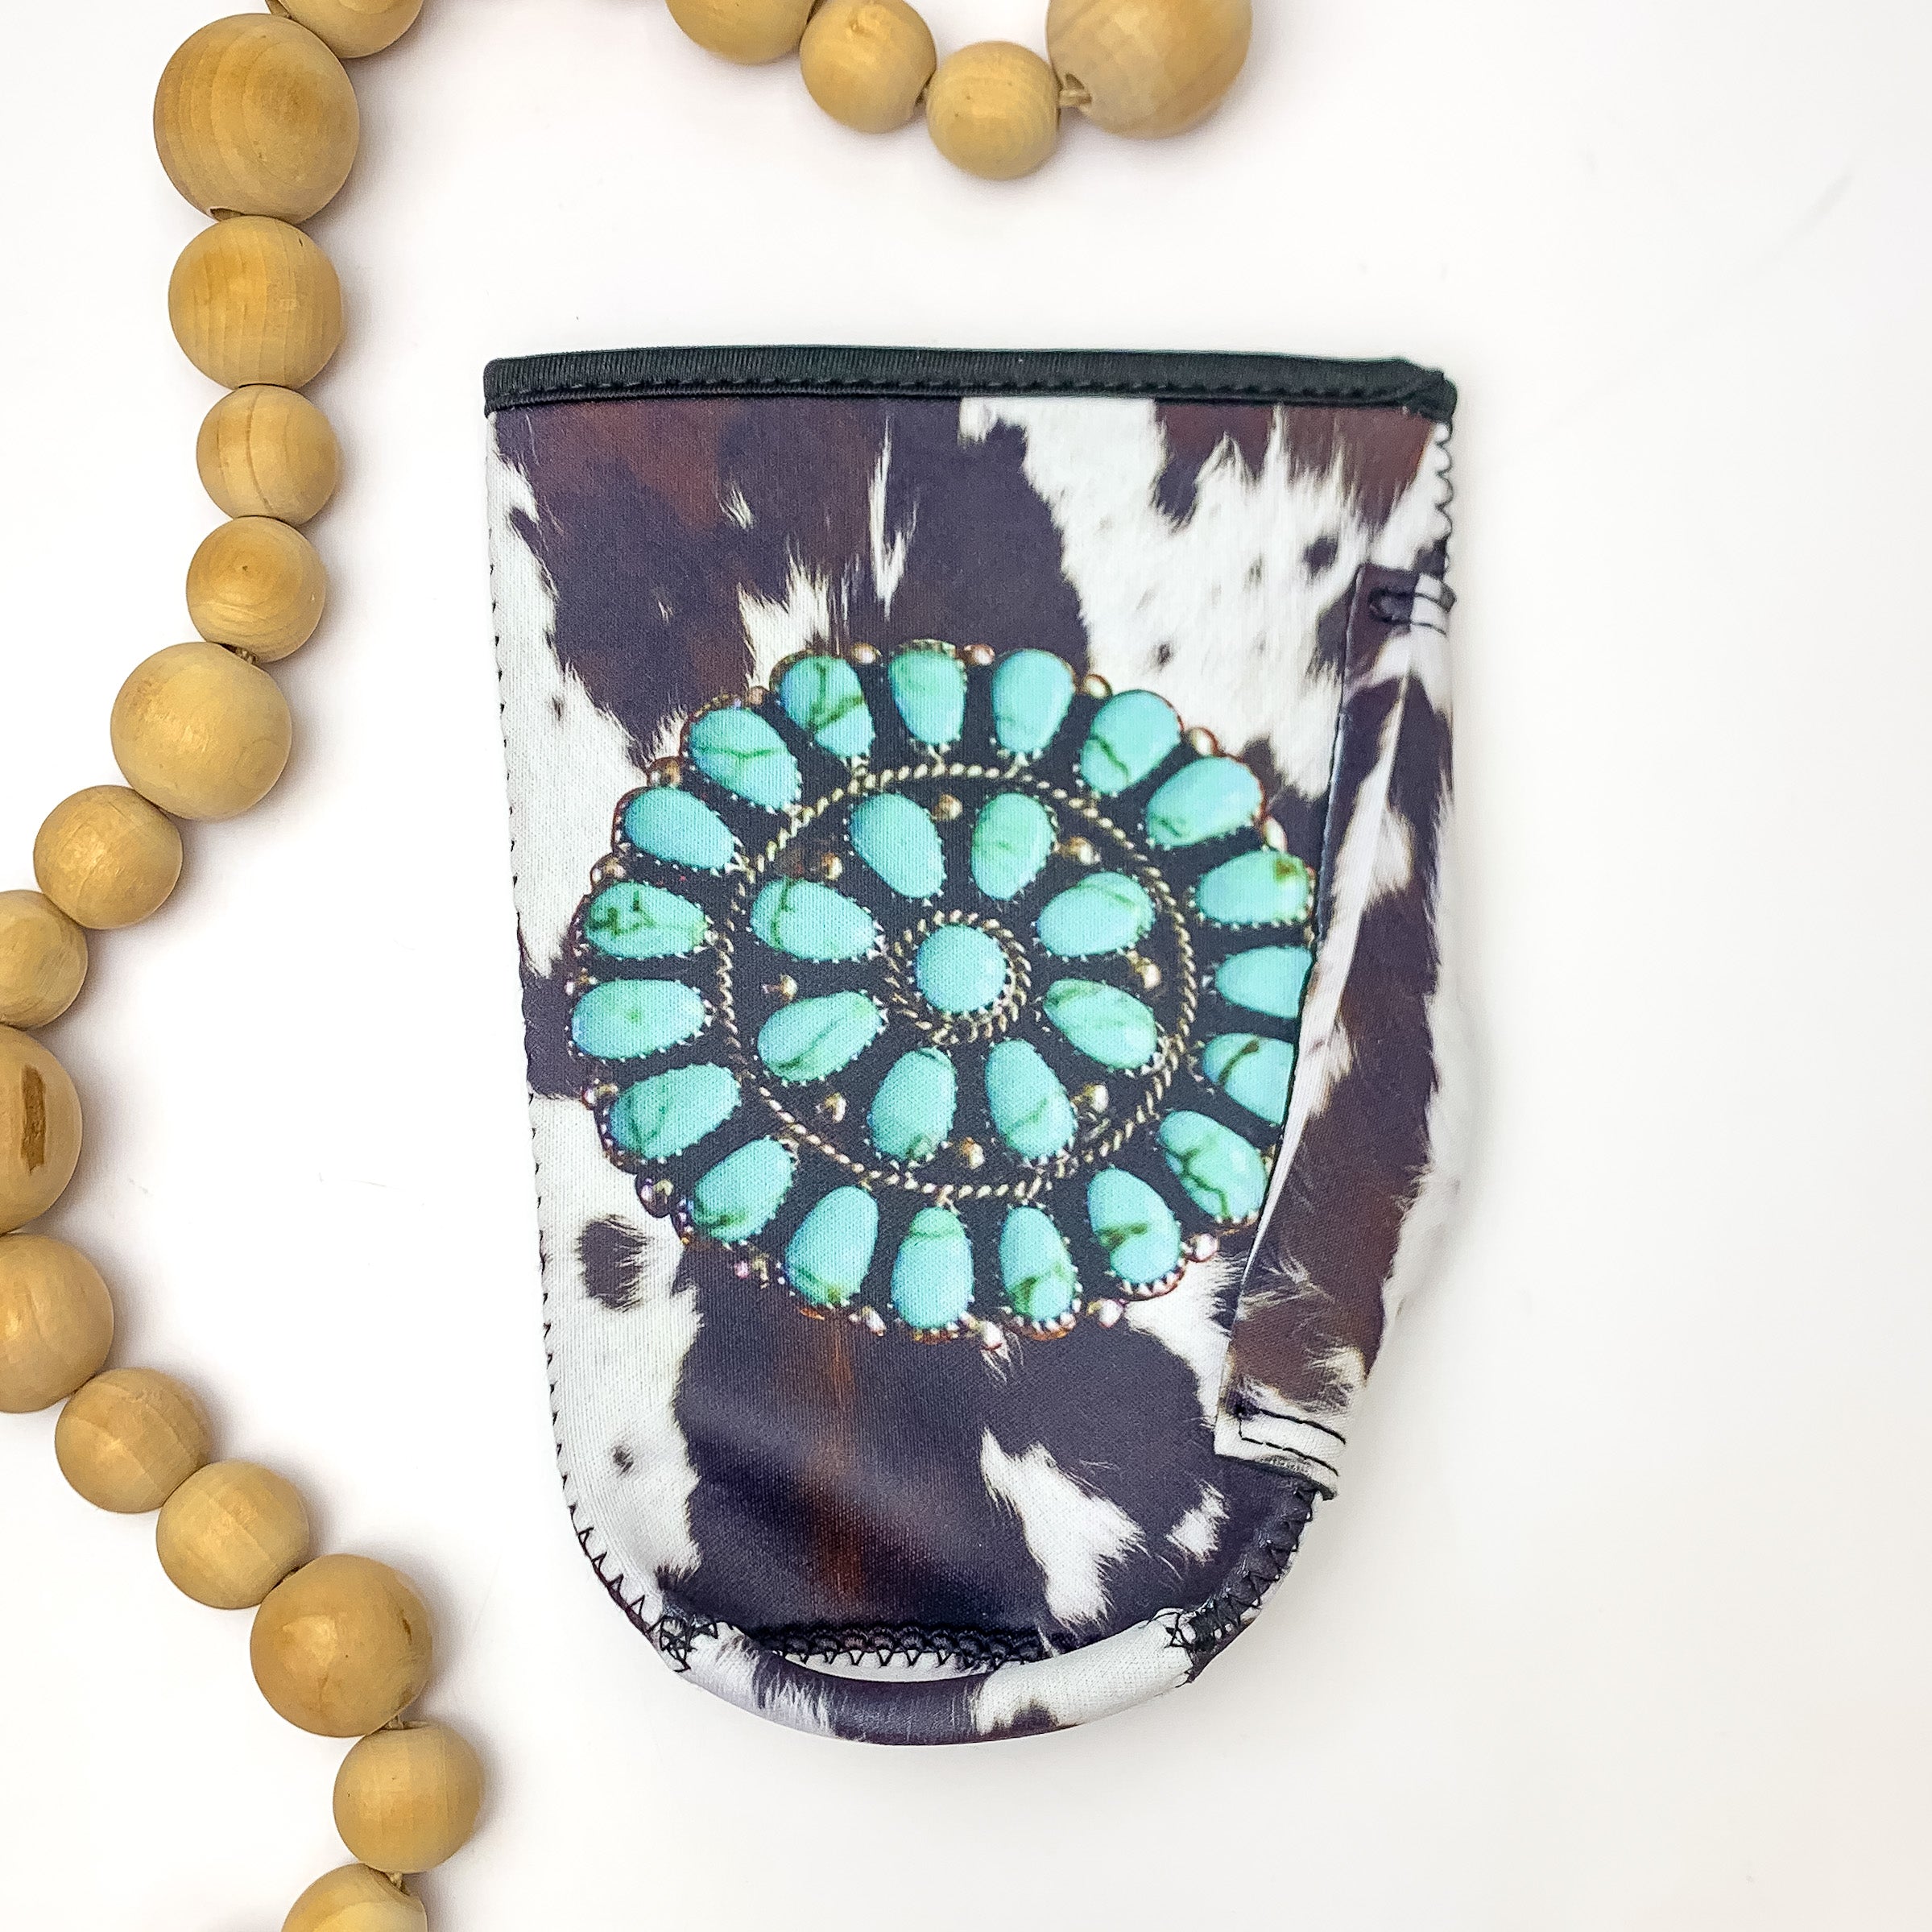 Cow Print Tumbler Drink Sleeve With Turquoise Circular Decoration. Pictured on a white background with wood beads on the left for decoration.